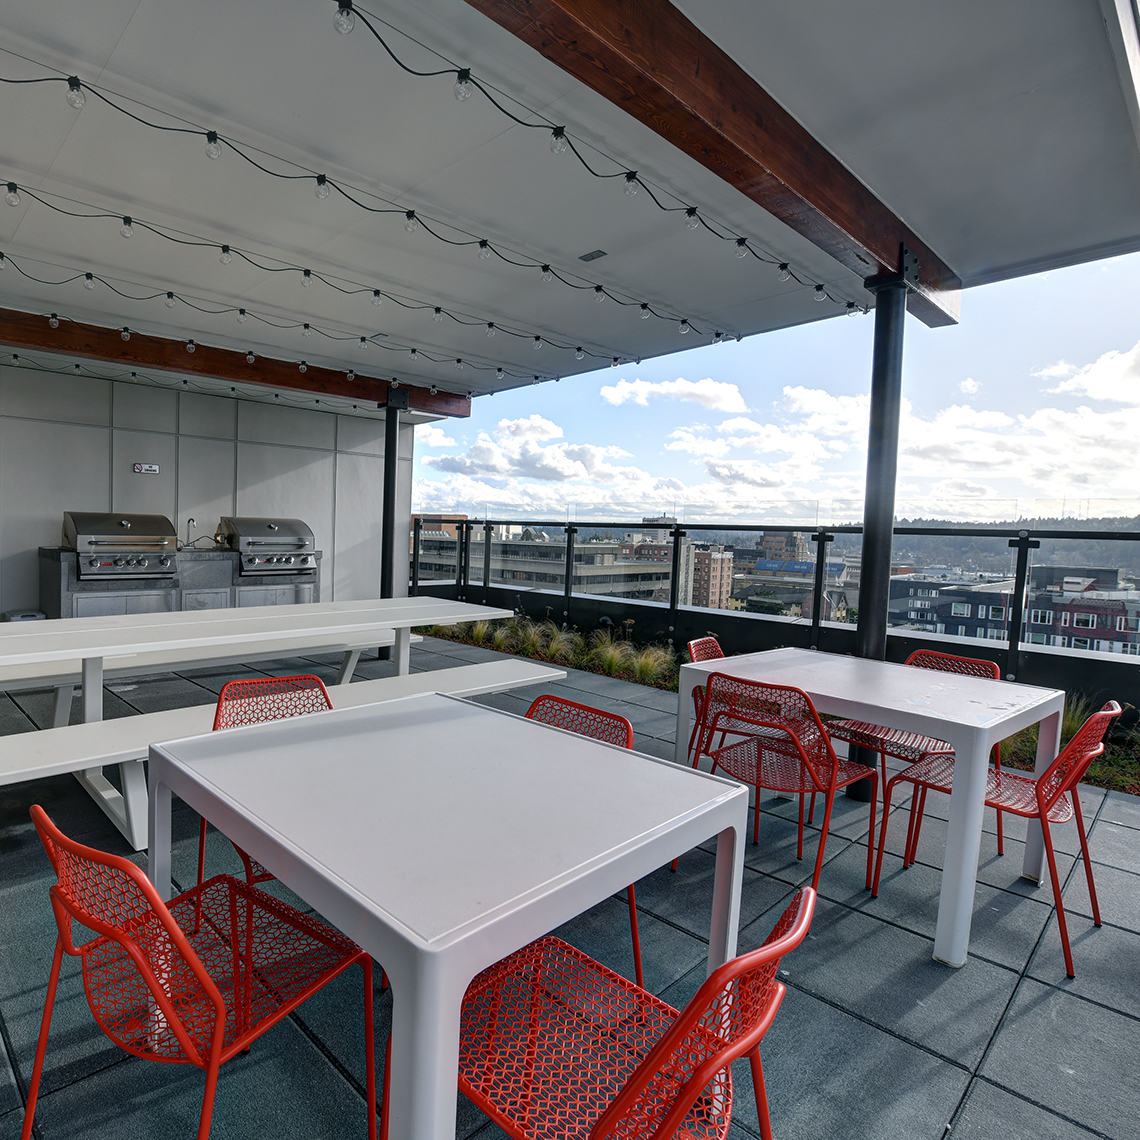 Barrientos RYAN and Exxel Pacific 4-Star UDistrict roof deck